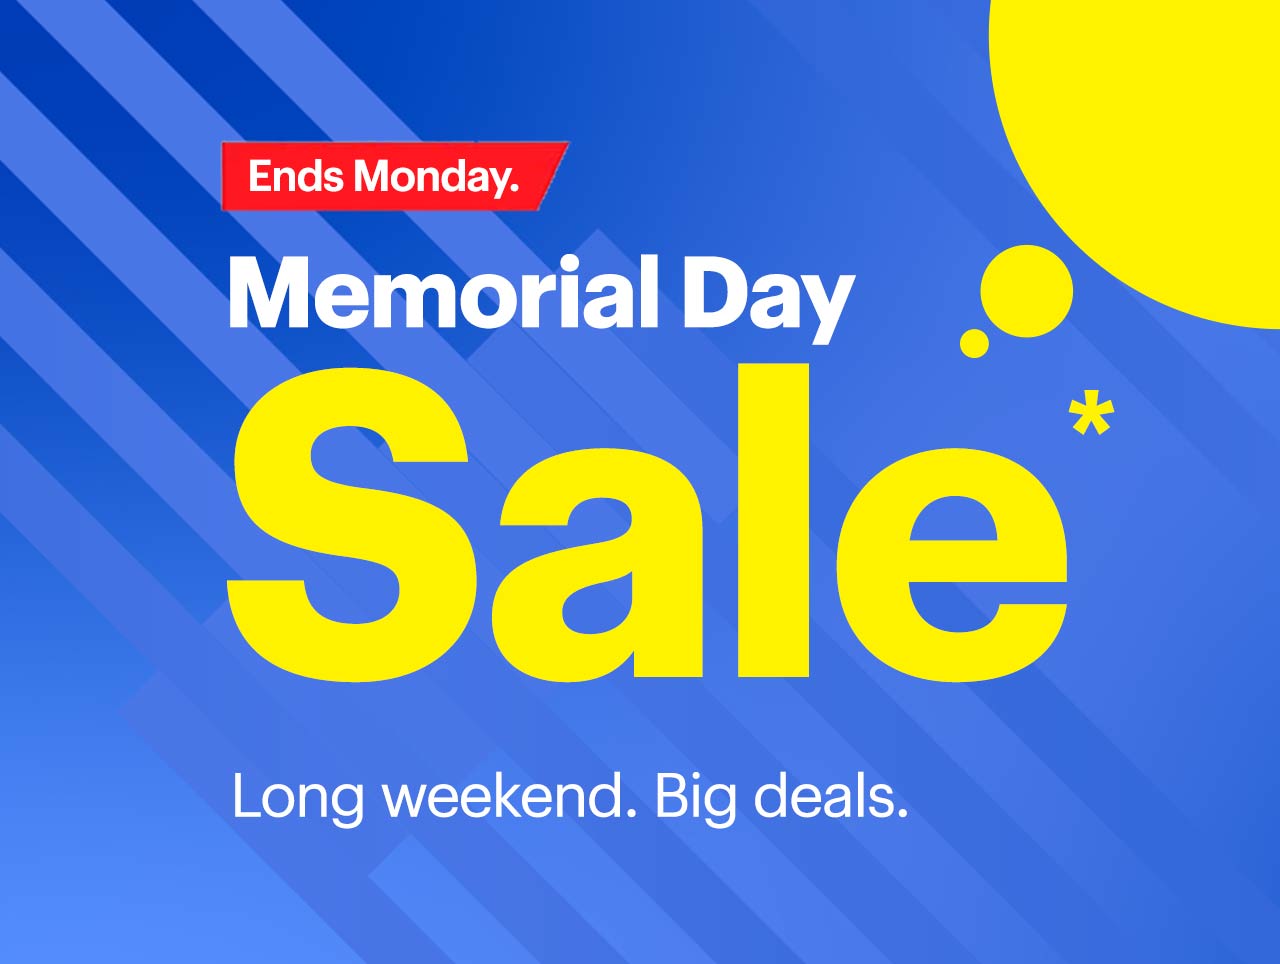 Memorial Day Sale. Long weekend. Big deals. Ends Monday. Reference disclaimer.